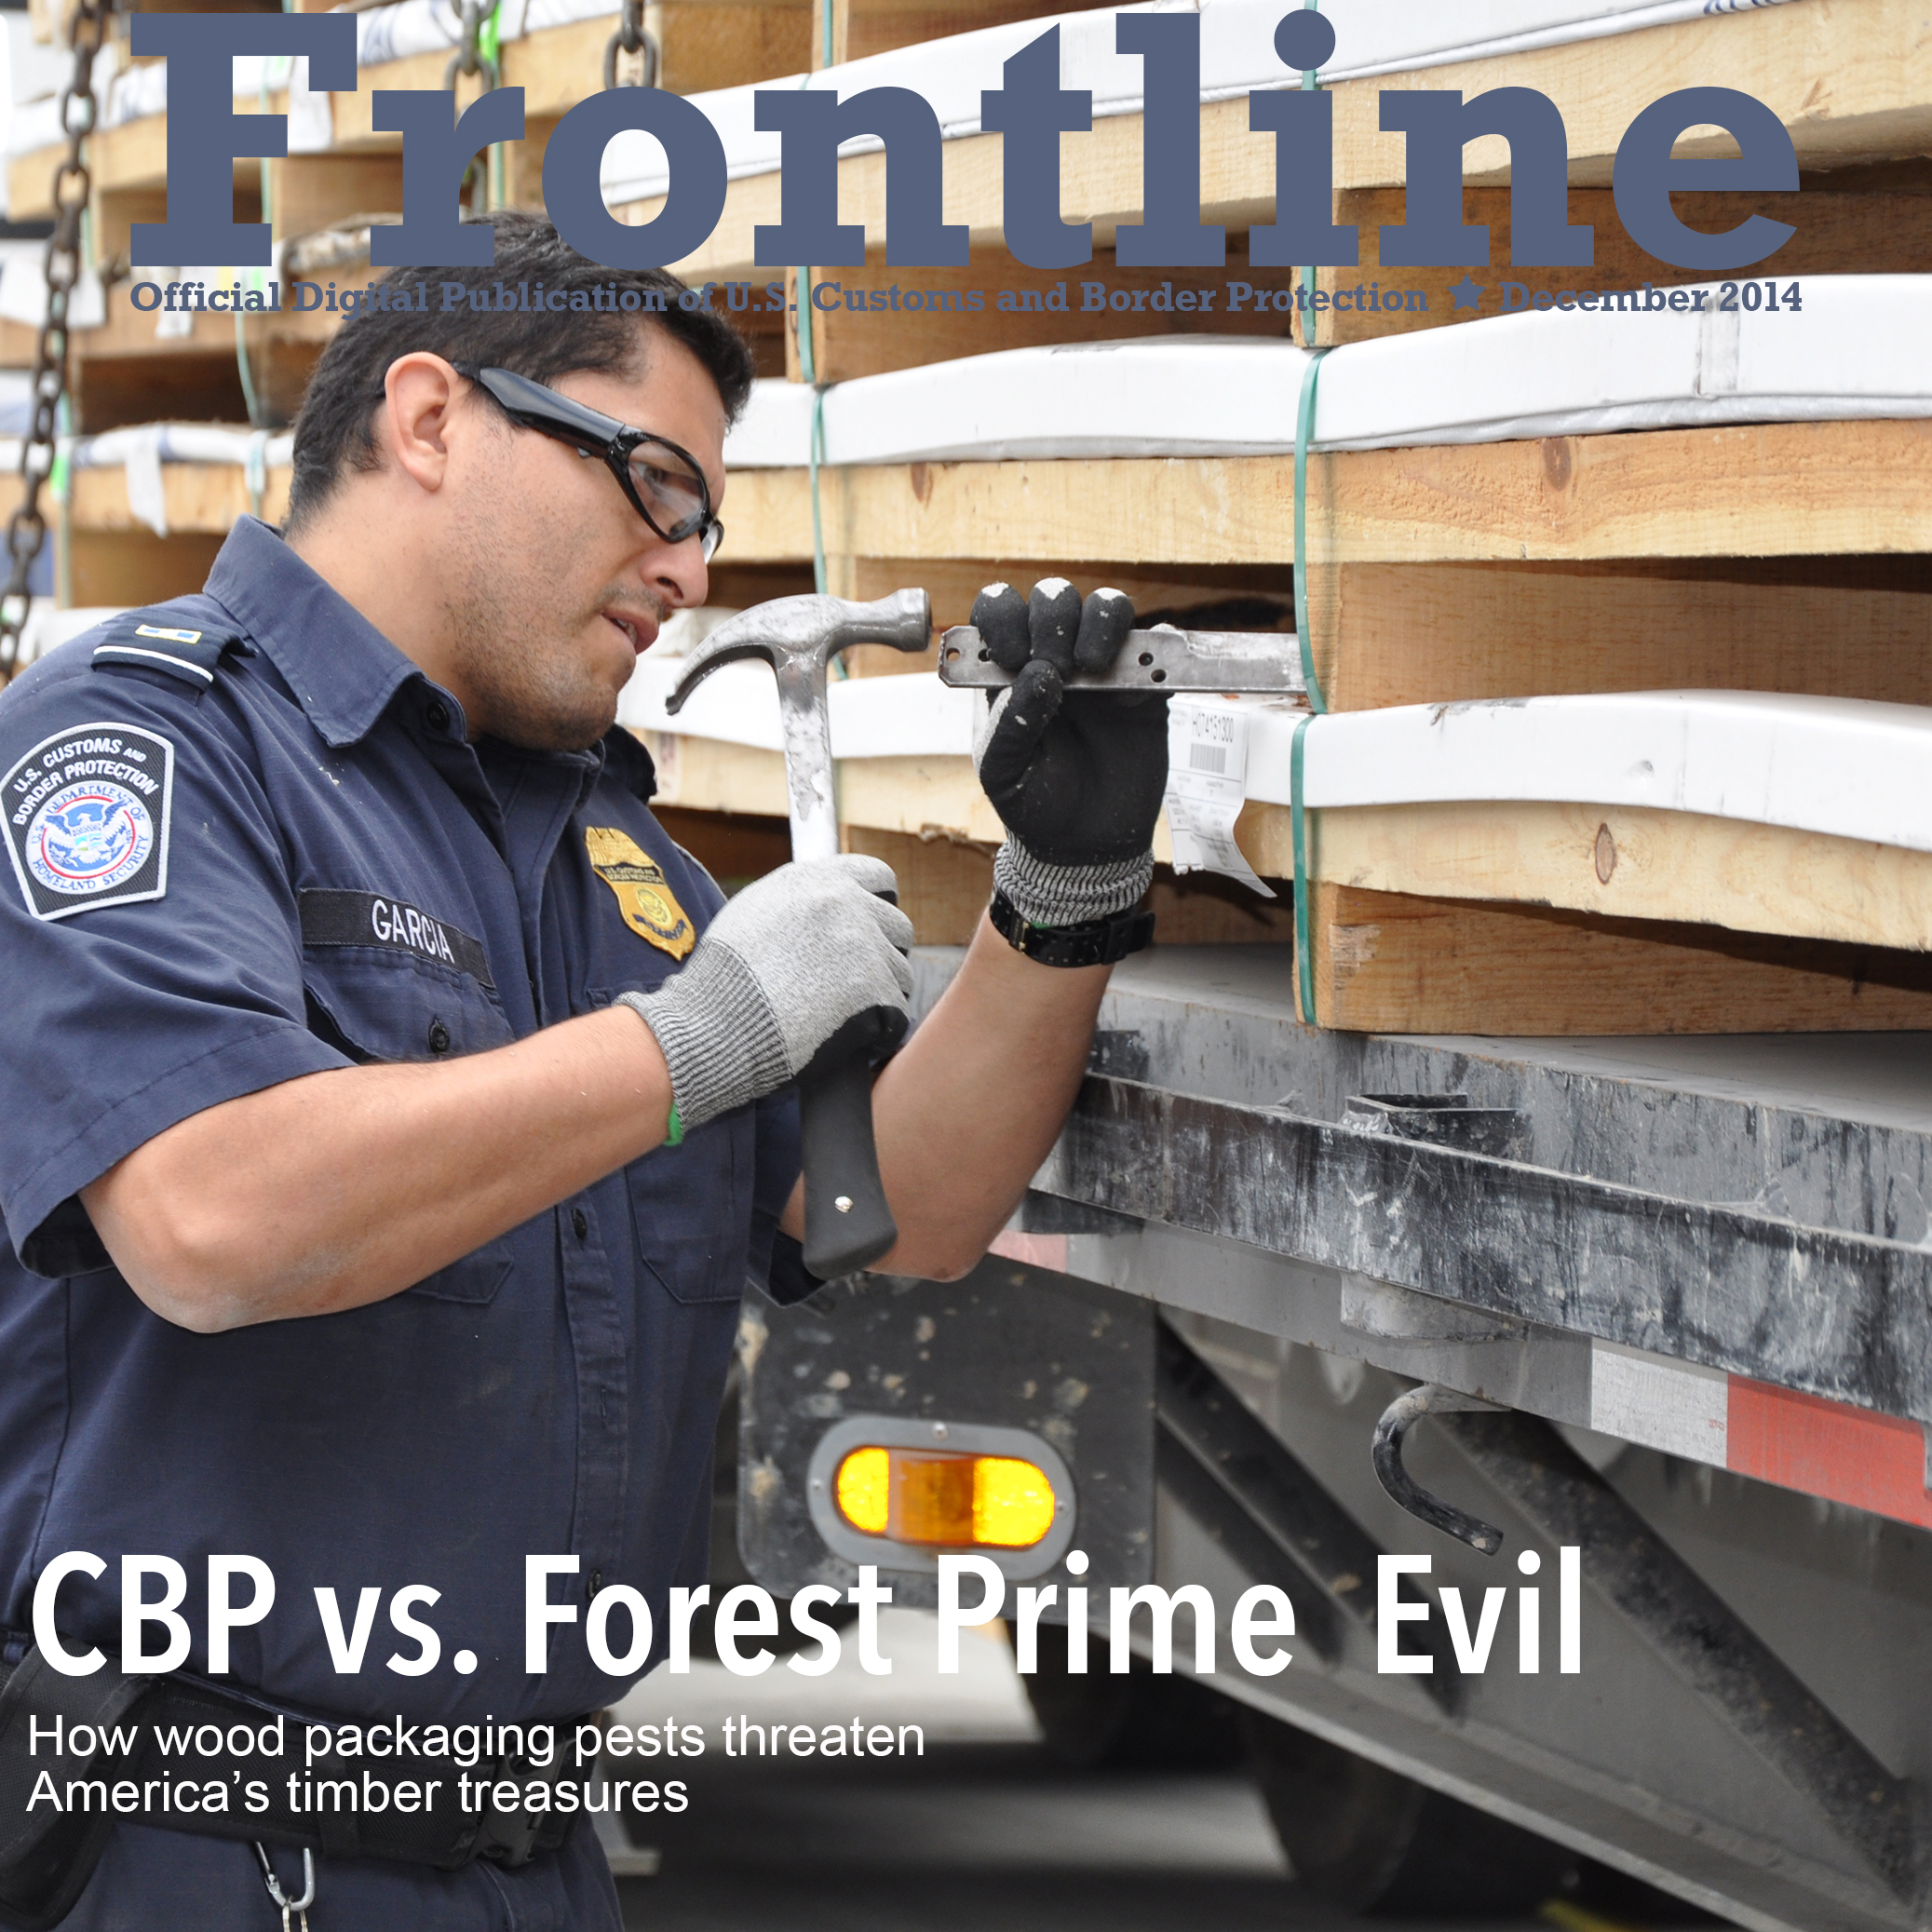 Photo of CBP agriculture specialist examing pallets for invasive pests